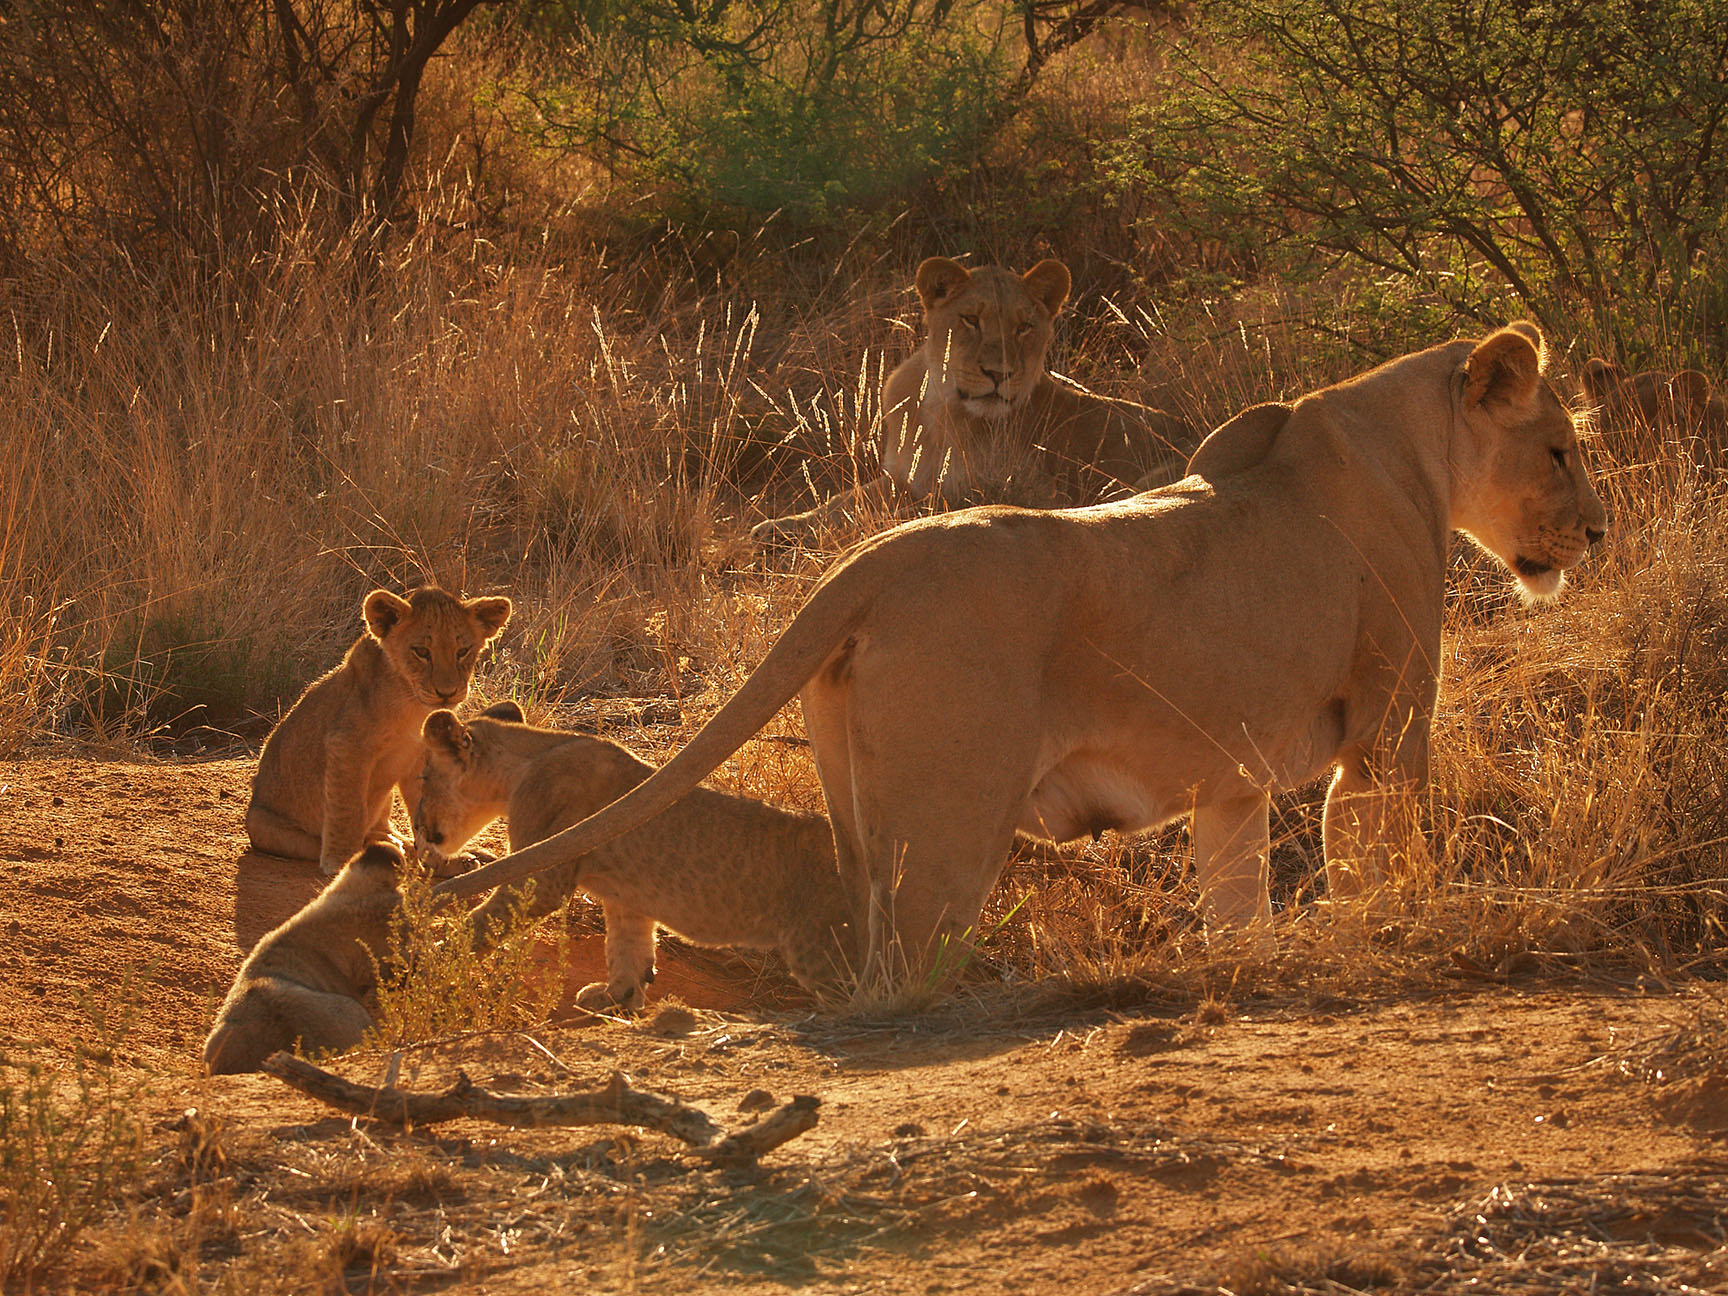 #South Africa, lioness wiuth cubs